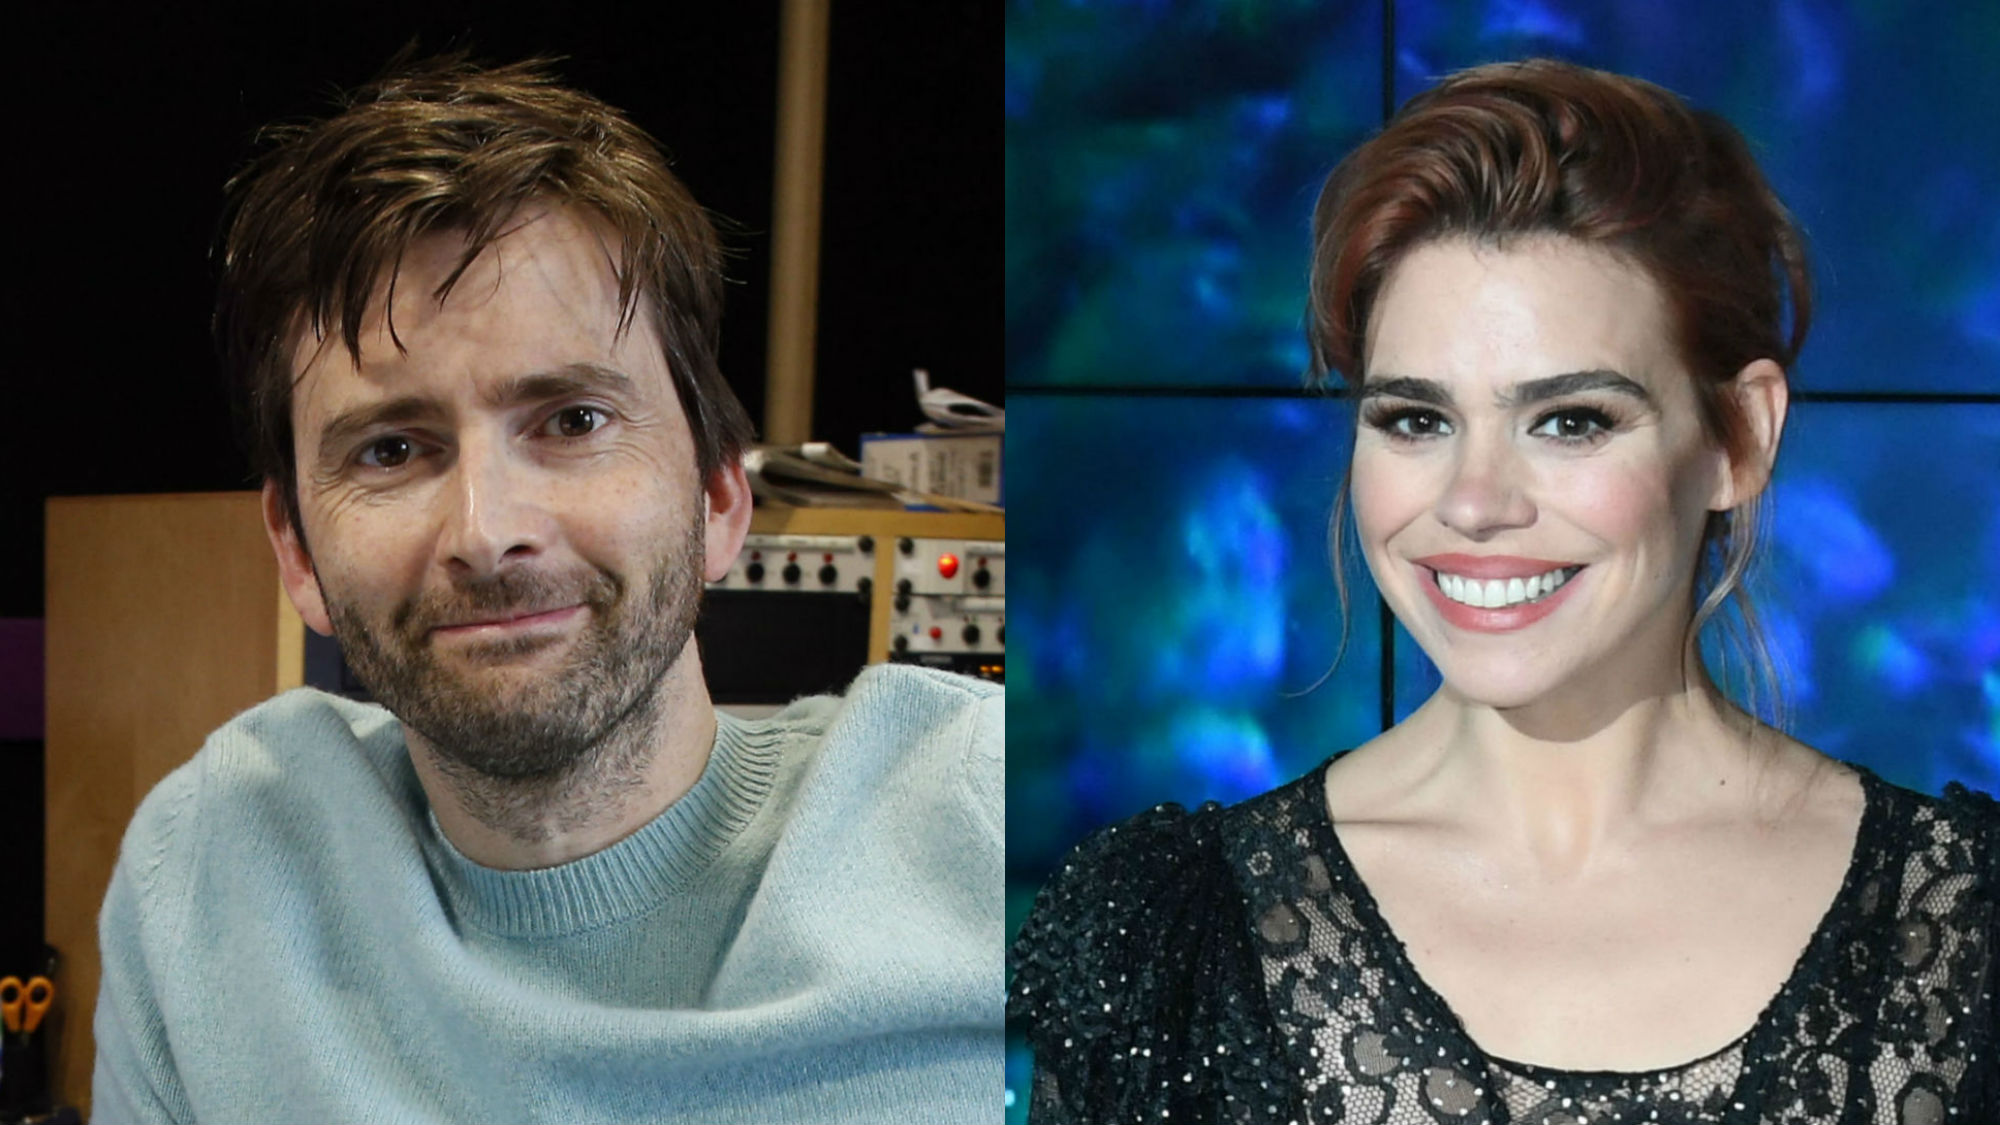 David Tennant and Billie Piper Reminisce About 'Doctor Who' Days in Candid New Podcast